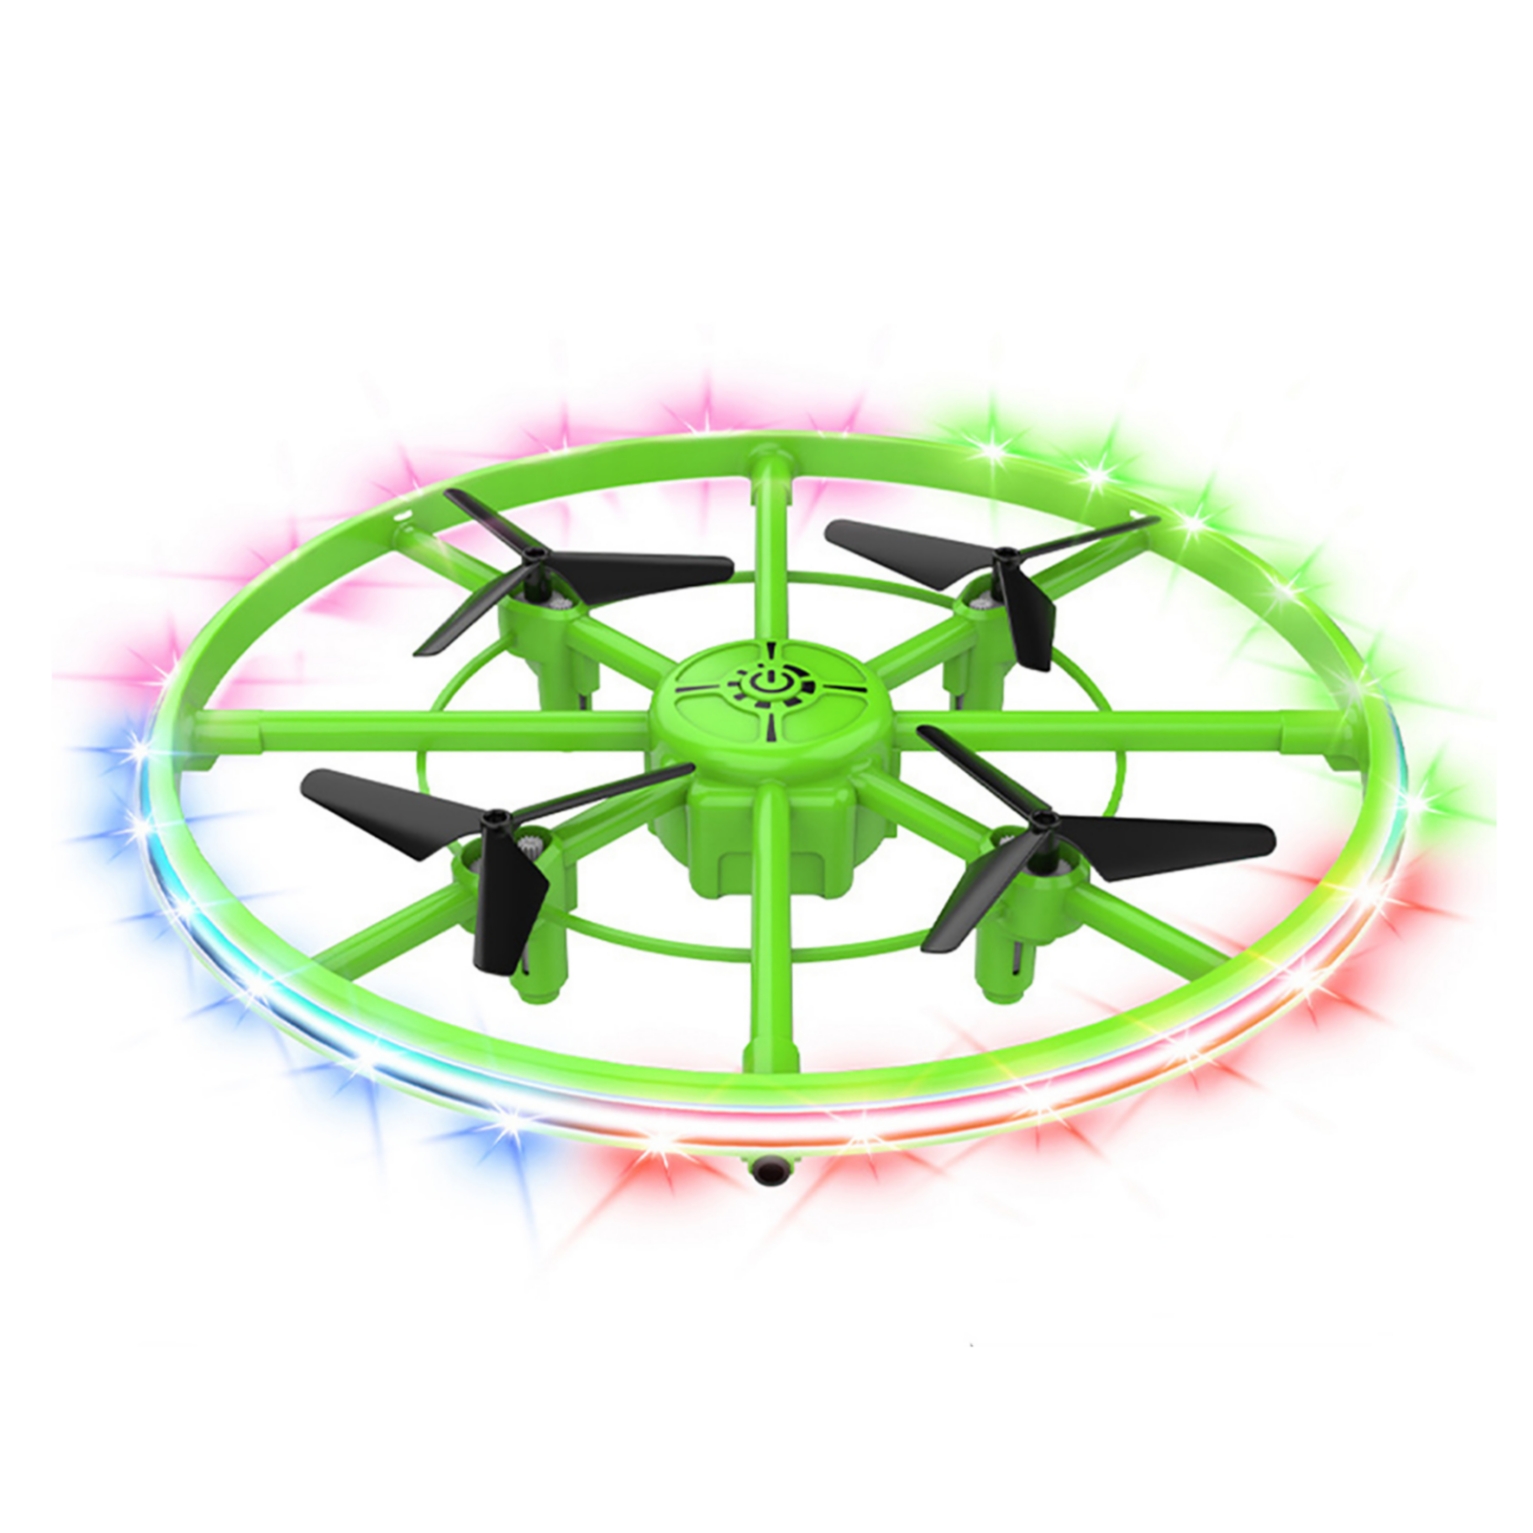 Mini RC Drone with LED Light Smart Altitude Hold Obstacle Avoidance Remote Control Quadcopter Yellow Foam